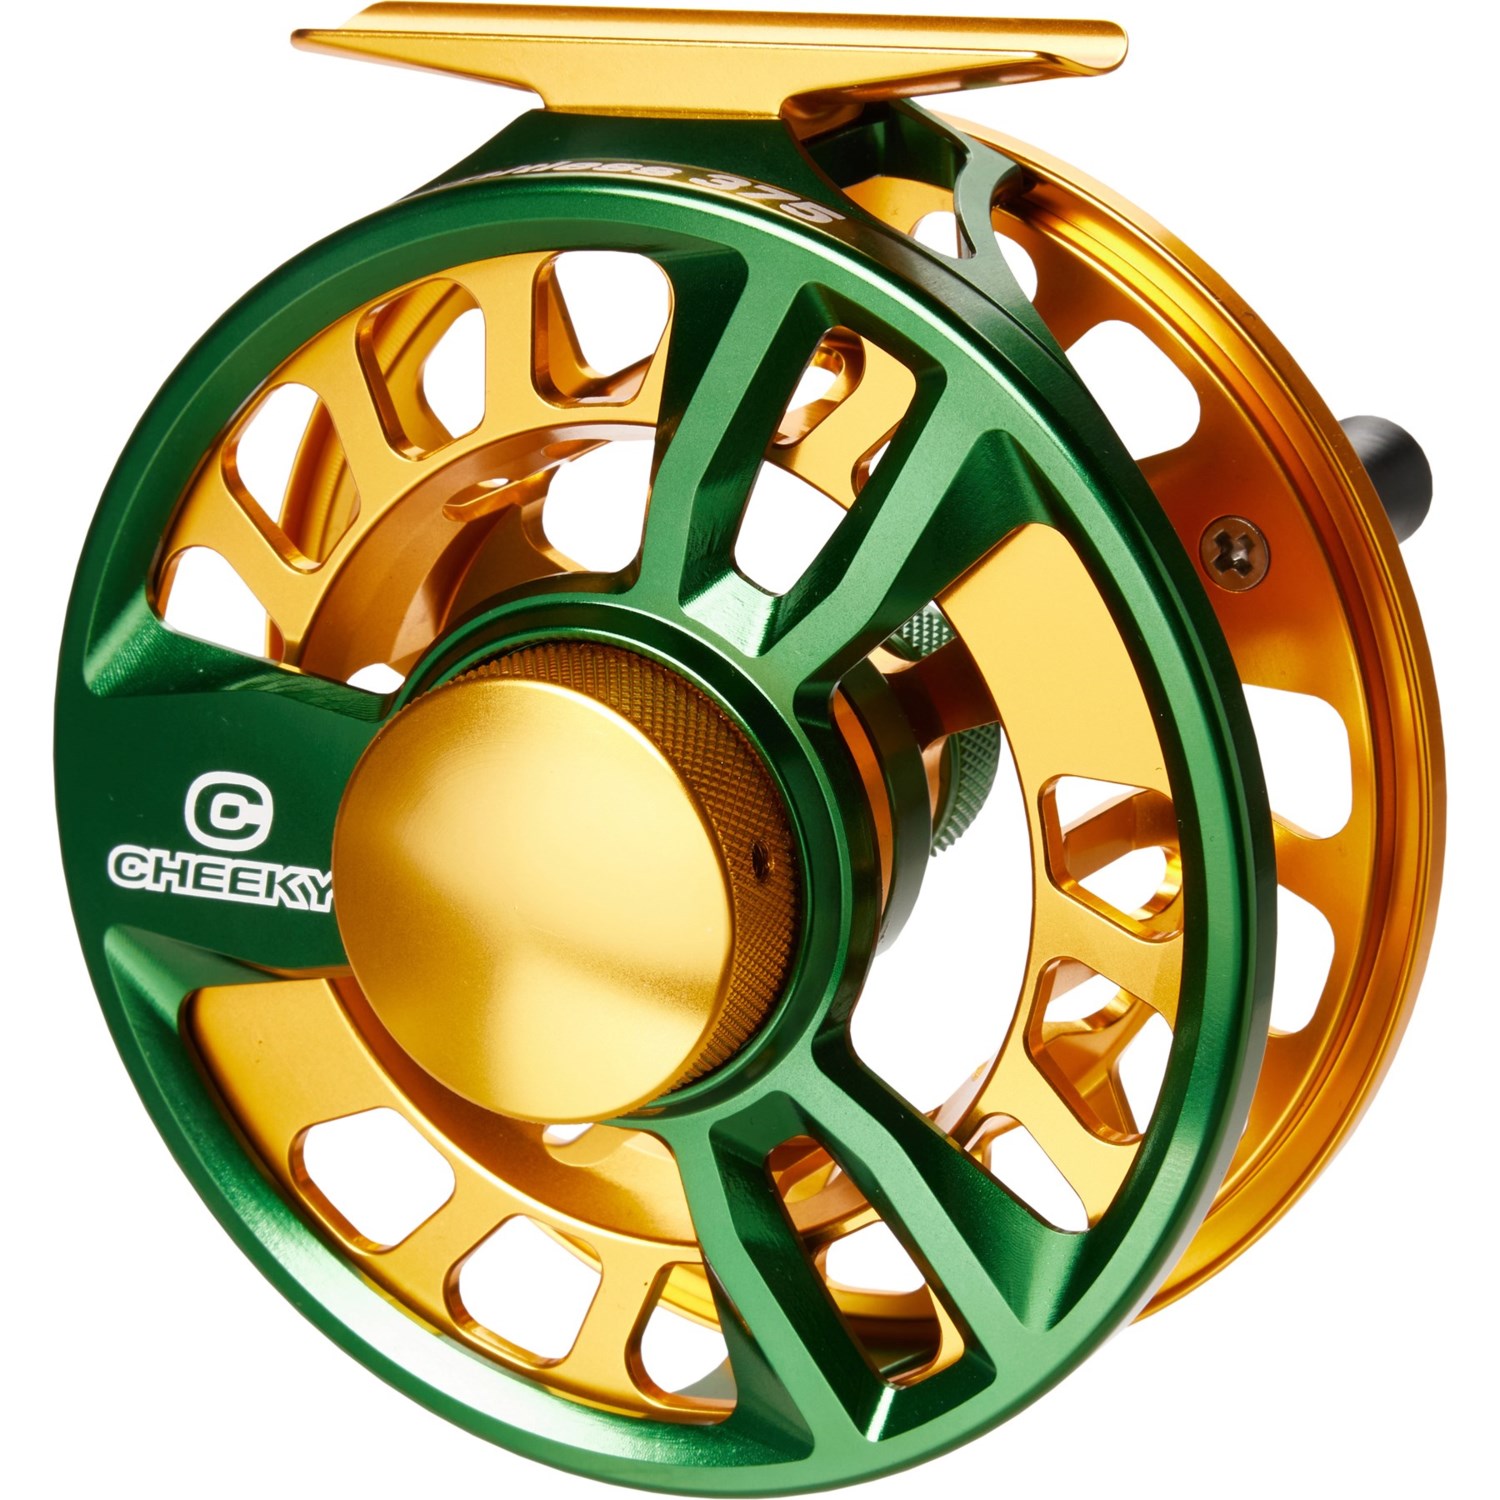 5/6 reel with 7wt line?